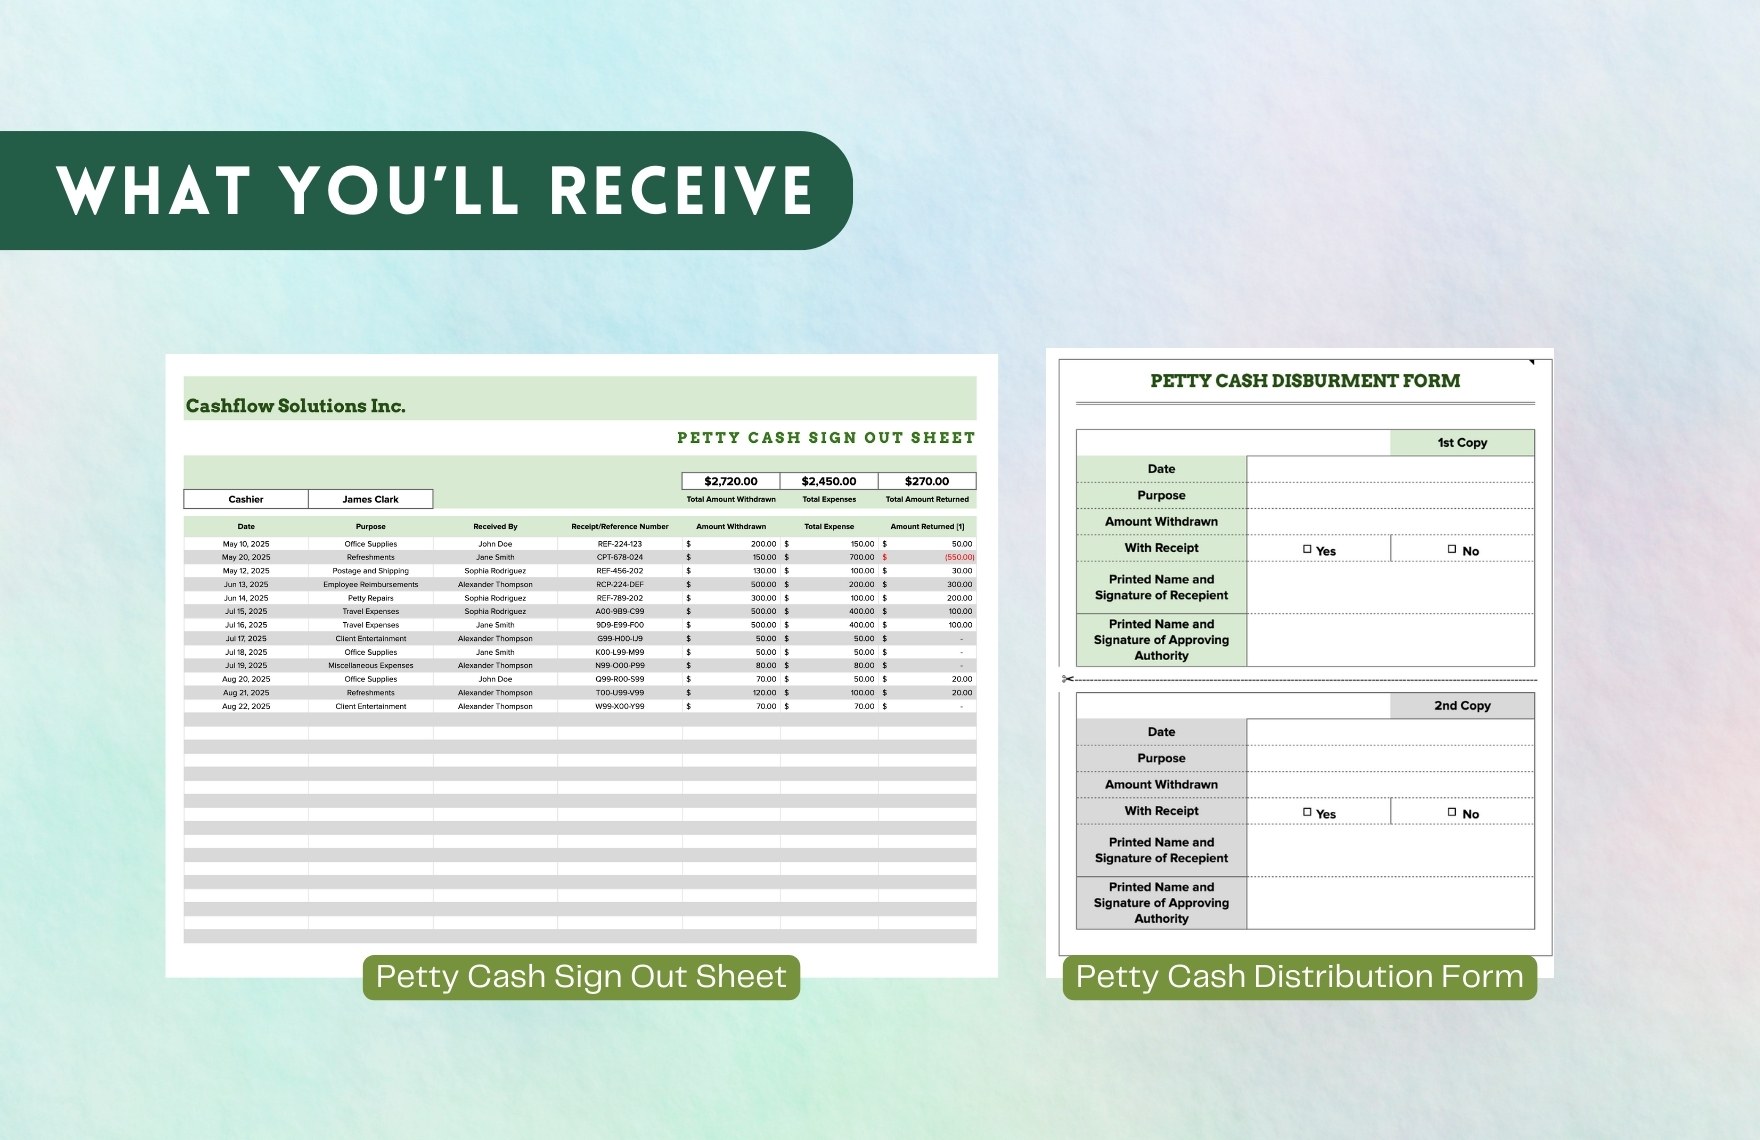 Petty Cash Sign Out Sheet Template